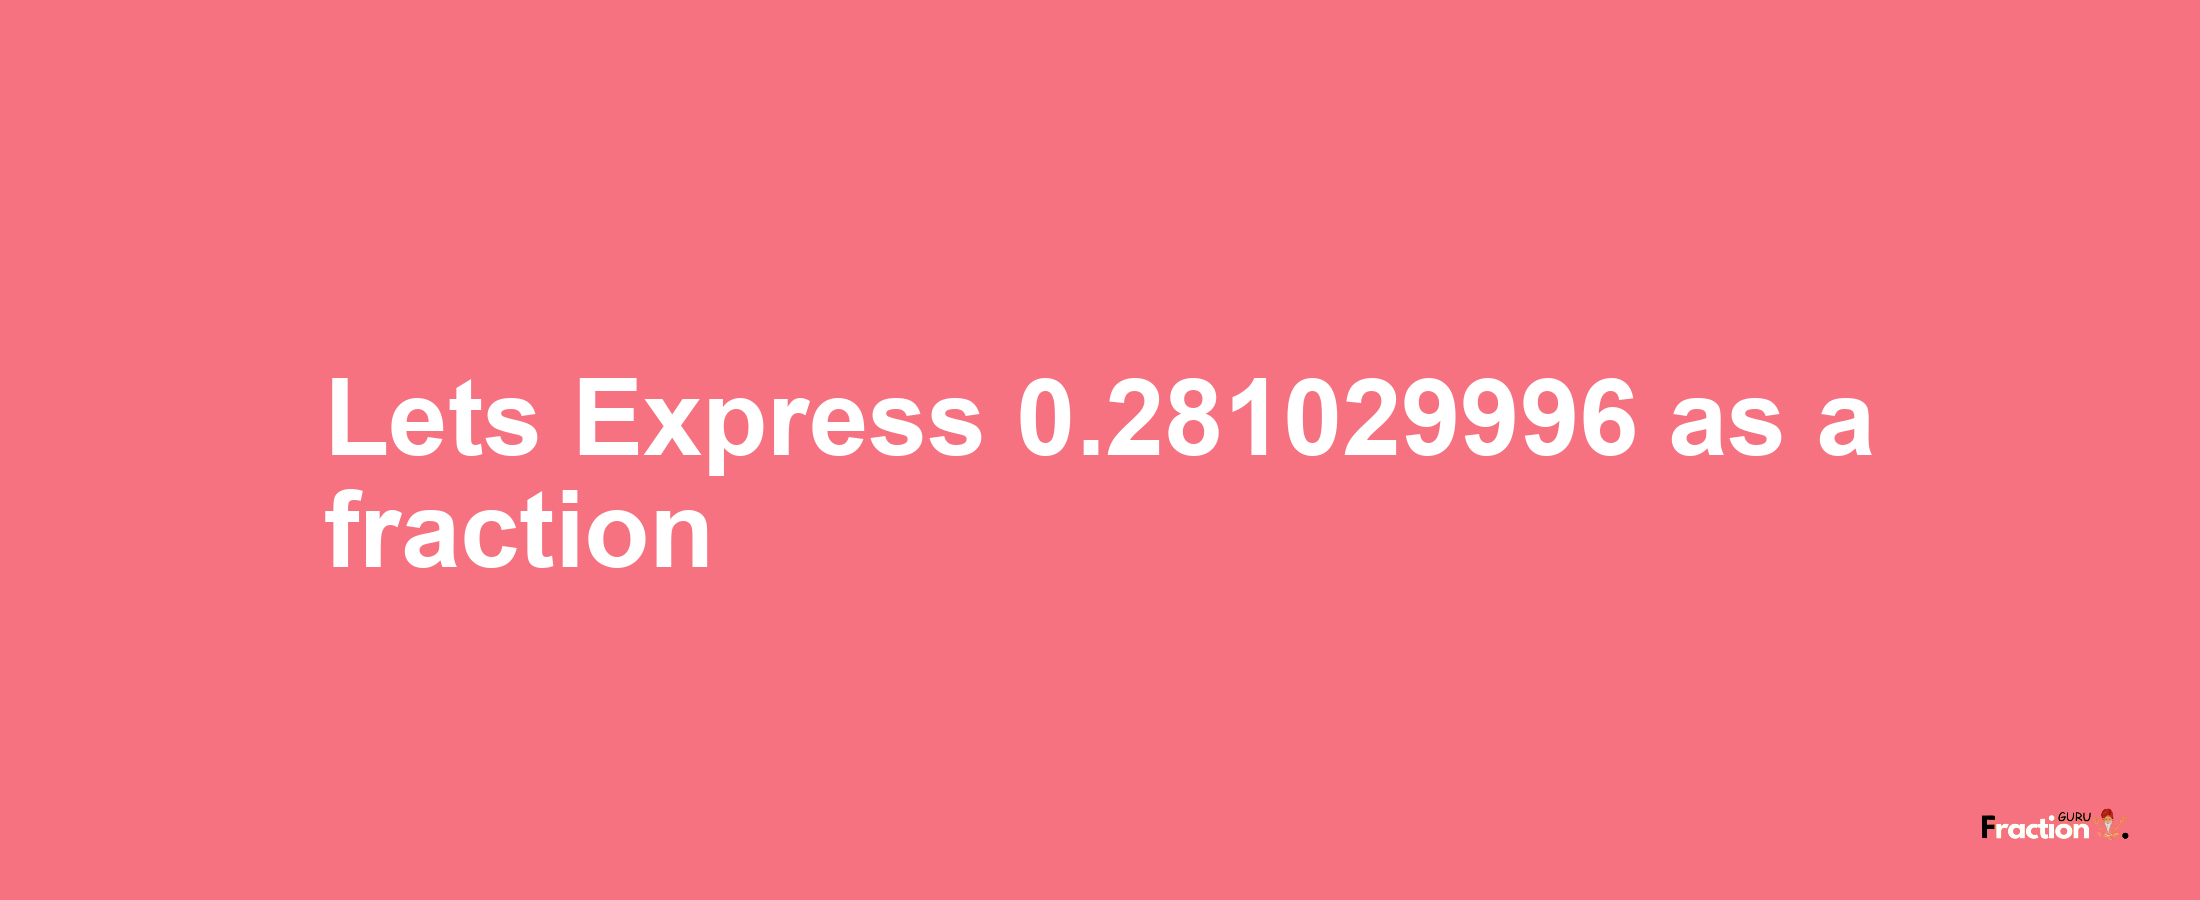 Lets Express 0.281029996 as afraction